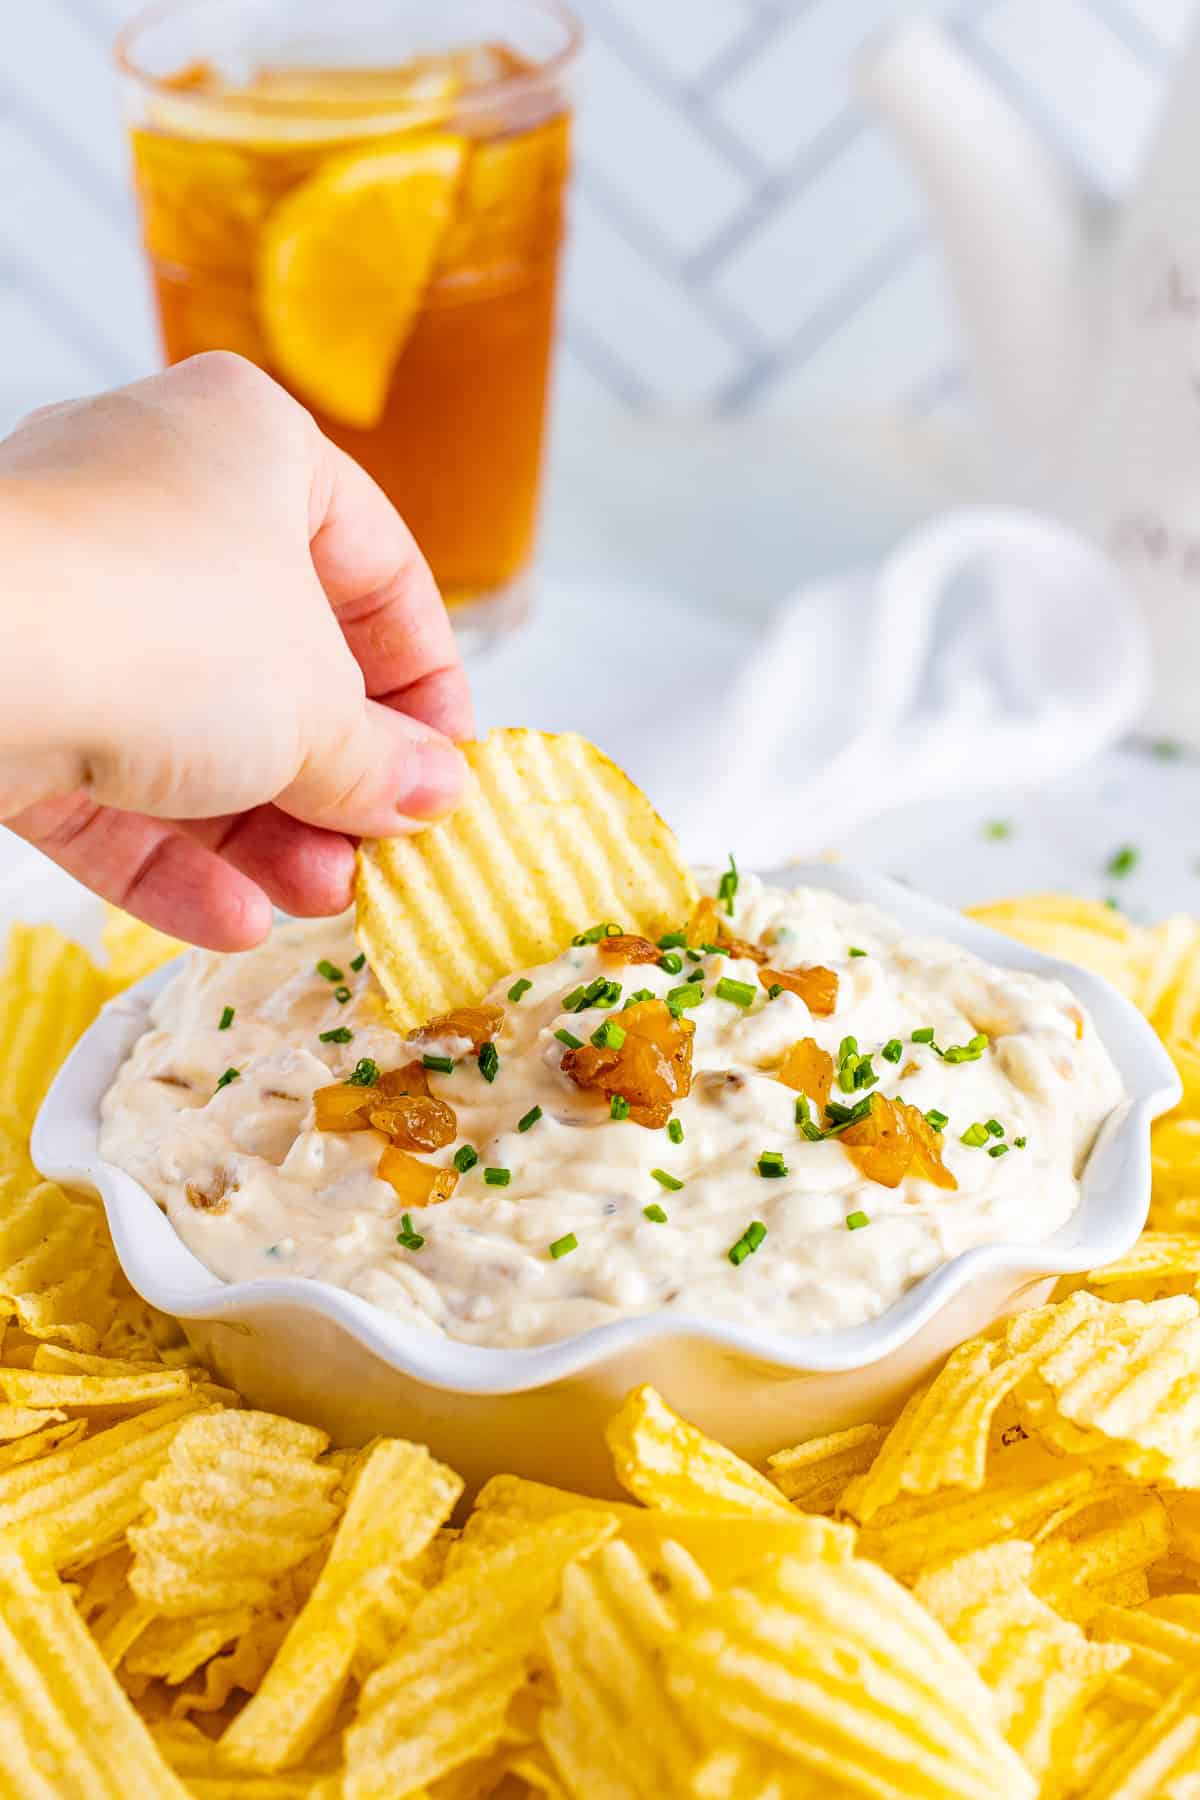 Hand dipping a potato chip in a bowl of French onion dip.